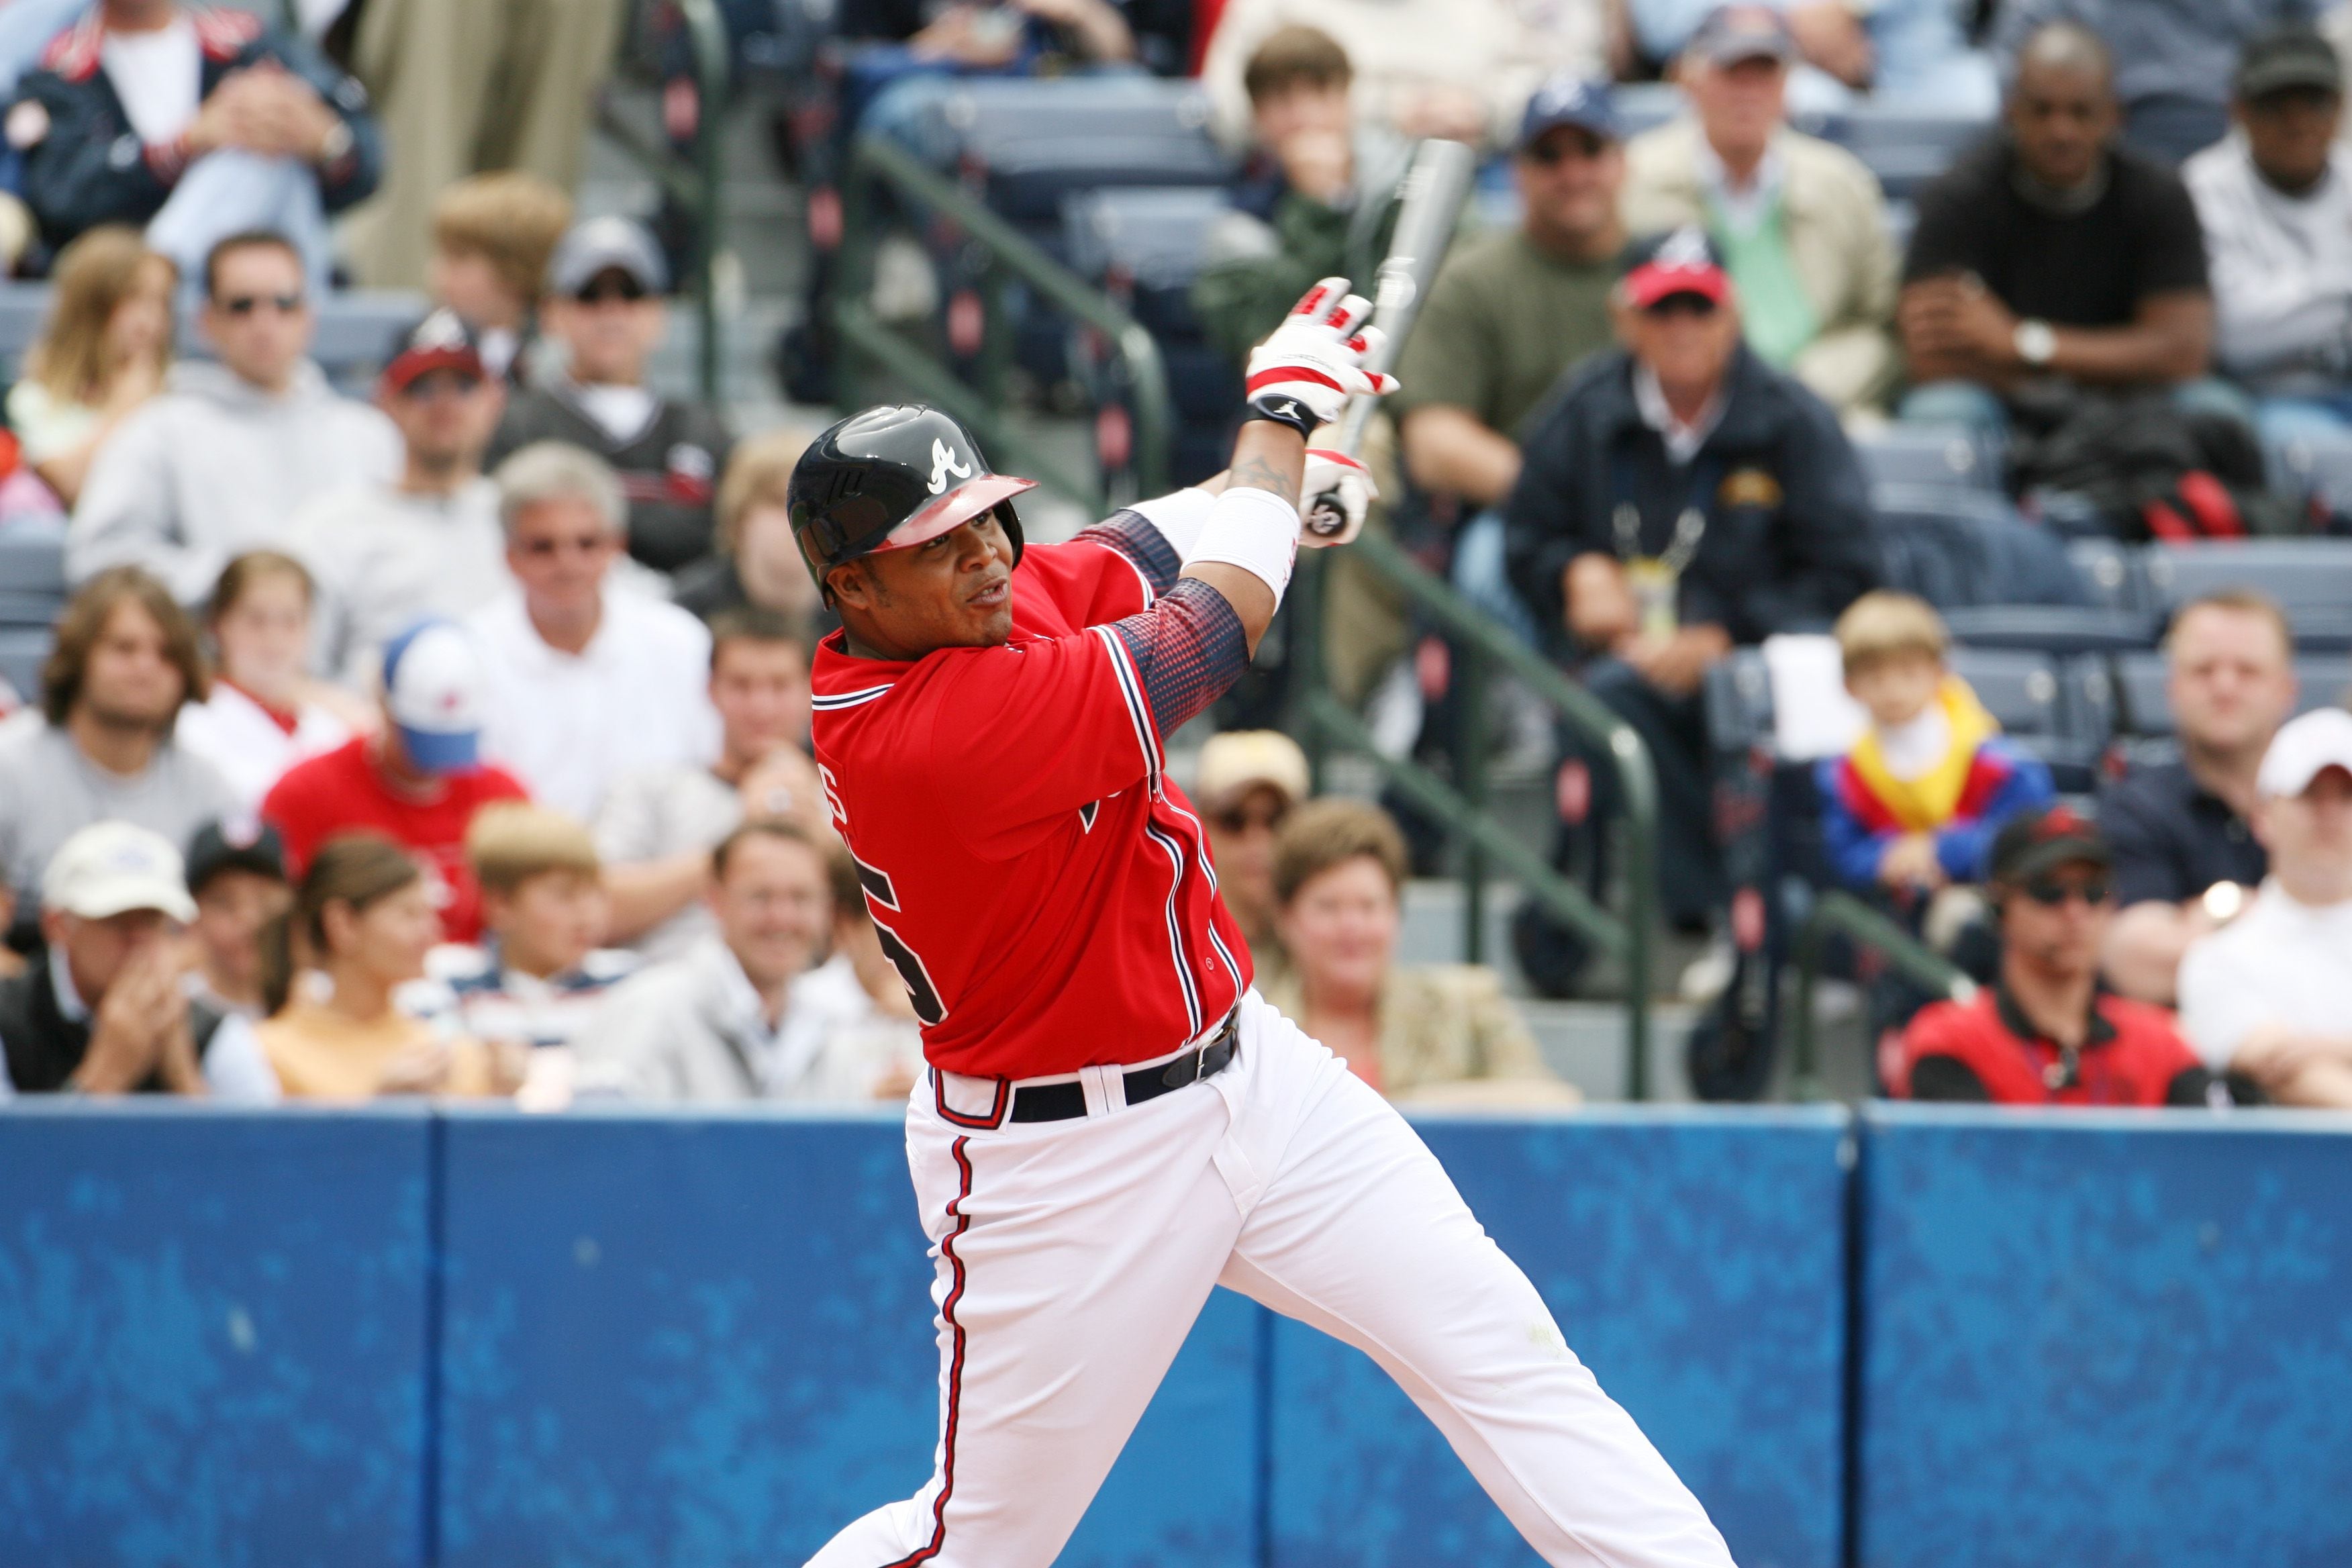 Braves to retire No. 25 in honor of legendary outfielder Andruw